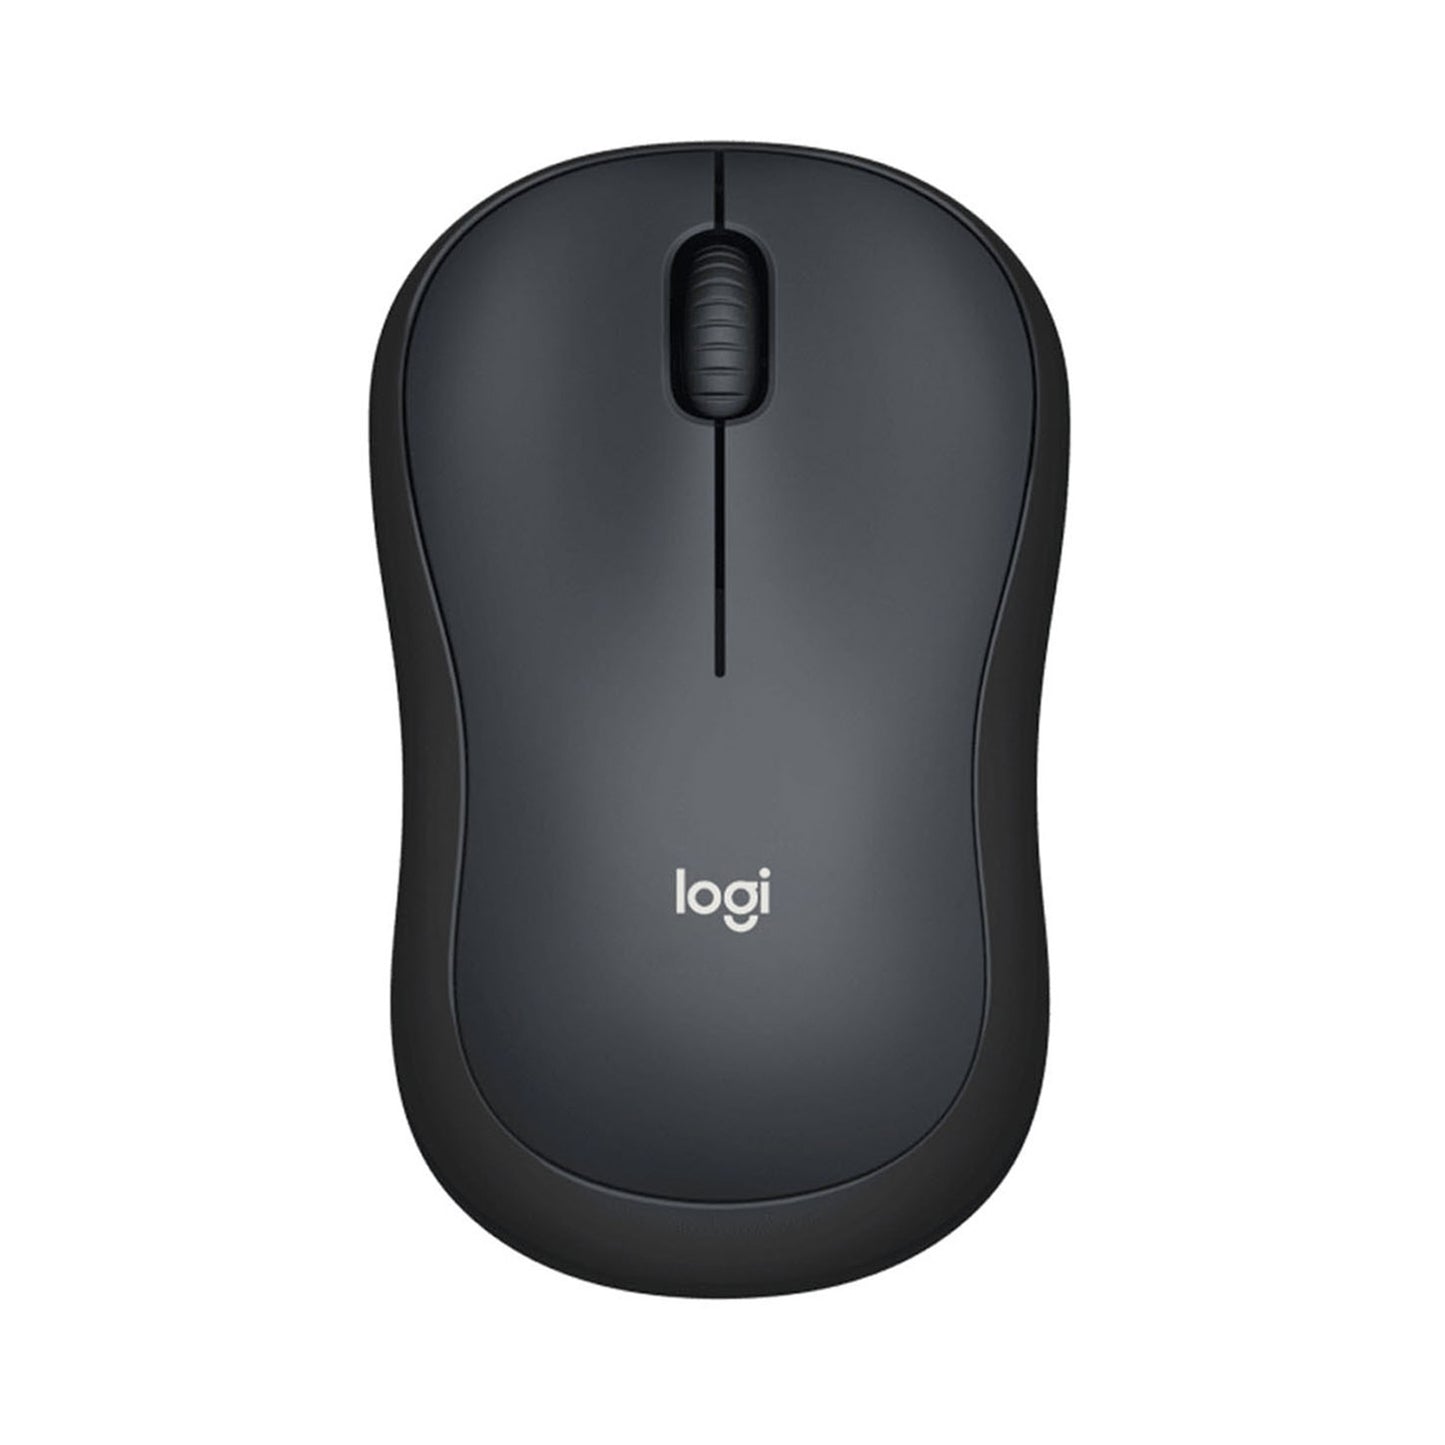 Logitech M221 Silent 2.4GHz Wireless USB Optical Mouse with 1000 DPI, Nano Receiver, 10m Wireless Range, Power Switch for Windows, macOS, Chrome OS, Linux (Blue, Charcoal, Red, Rose, White)